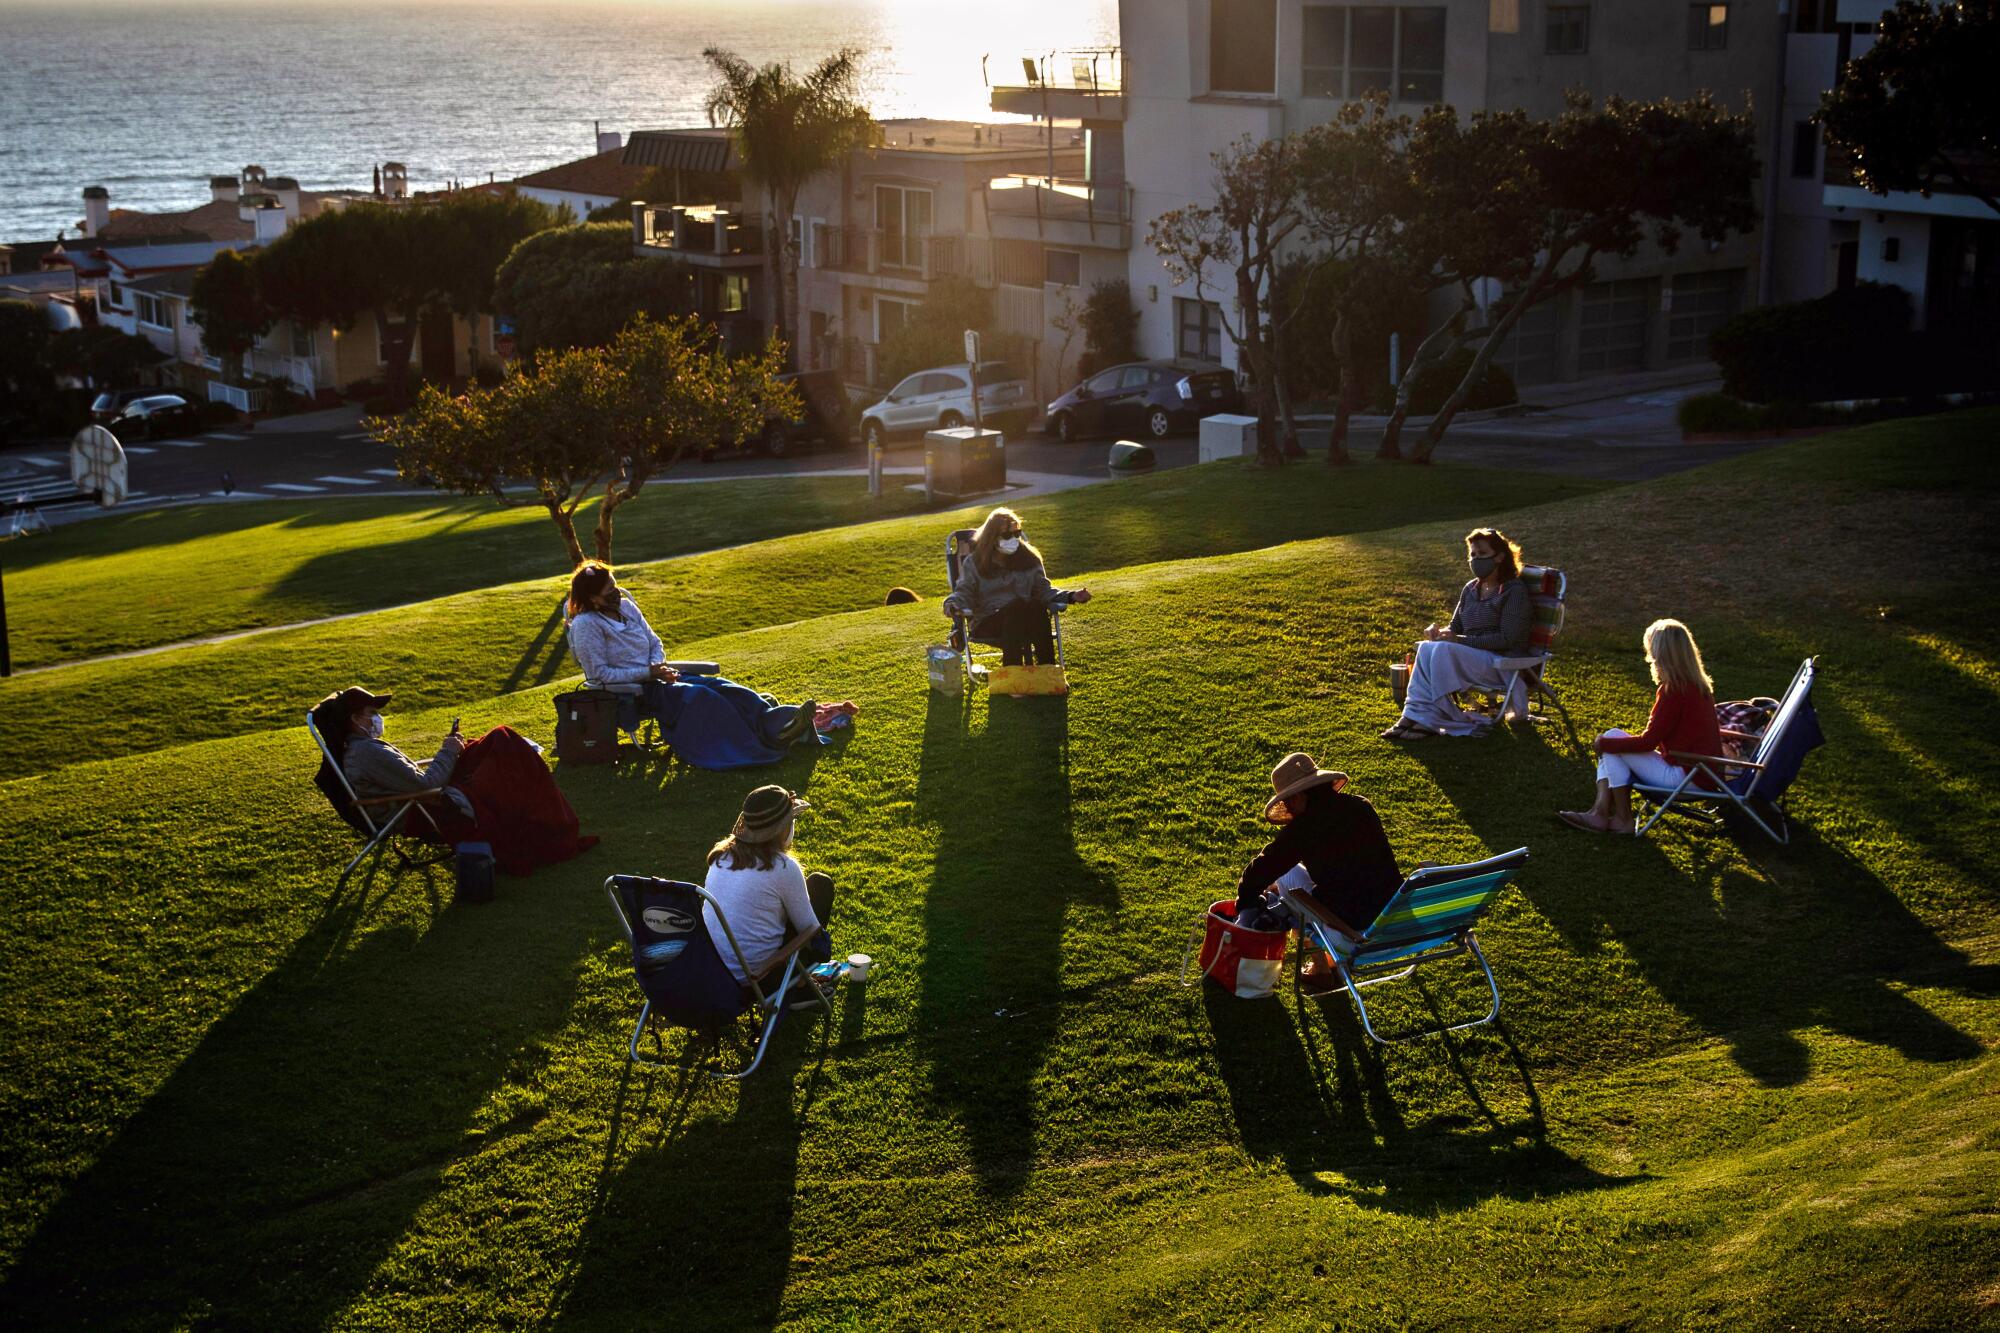 Seven people sit in lawn chairs arranged in a circle outdoors on a grassy sloped area, with the ocean in the background. 